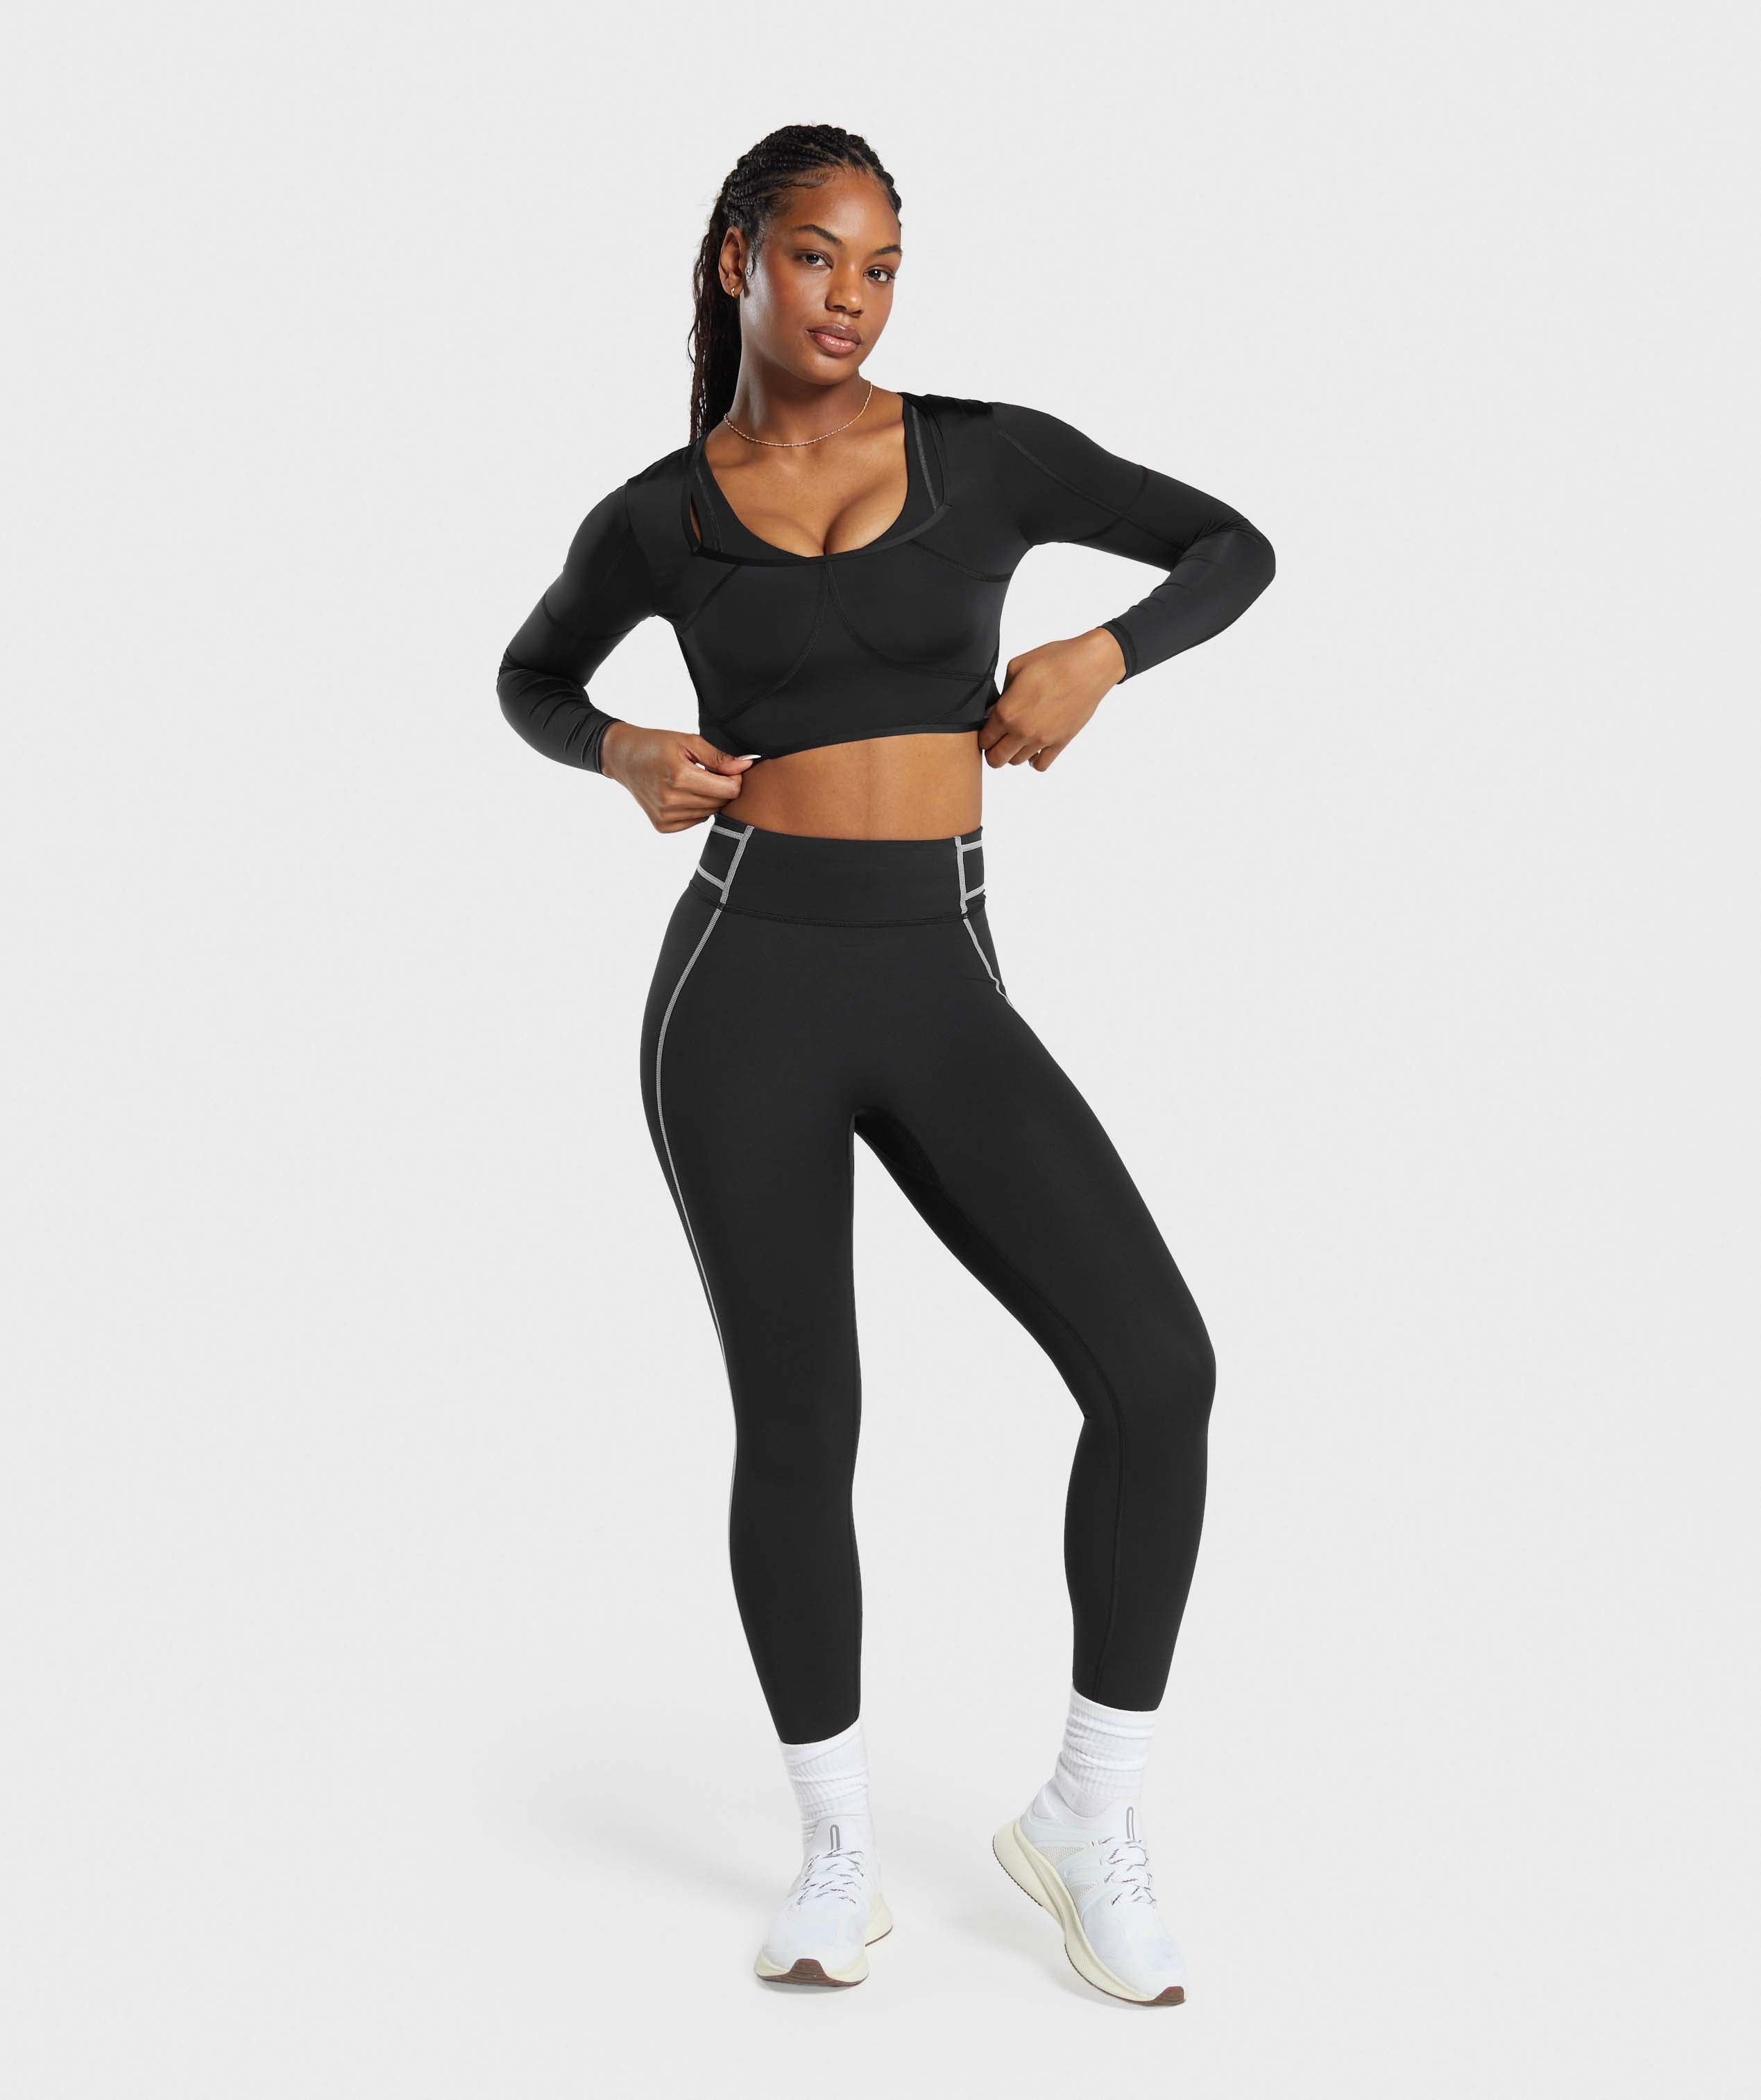 Stitch Feature Long Sleeve Crop Top in Black/Stock Black Marl - view 4